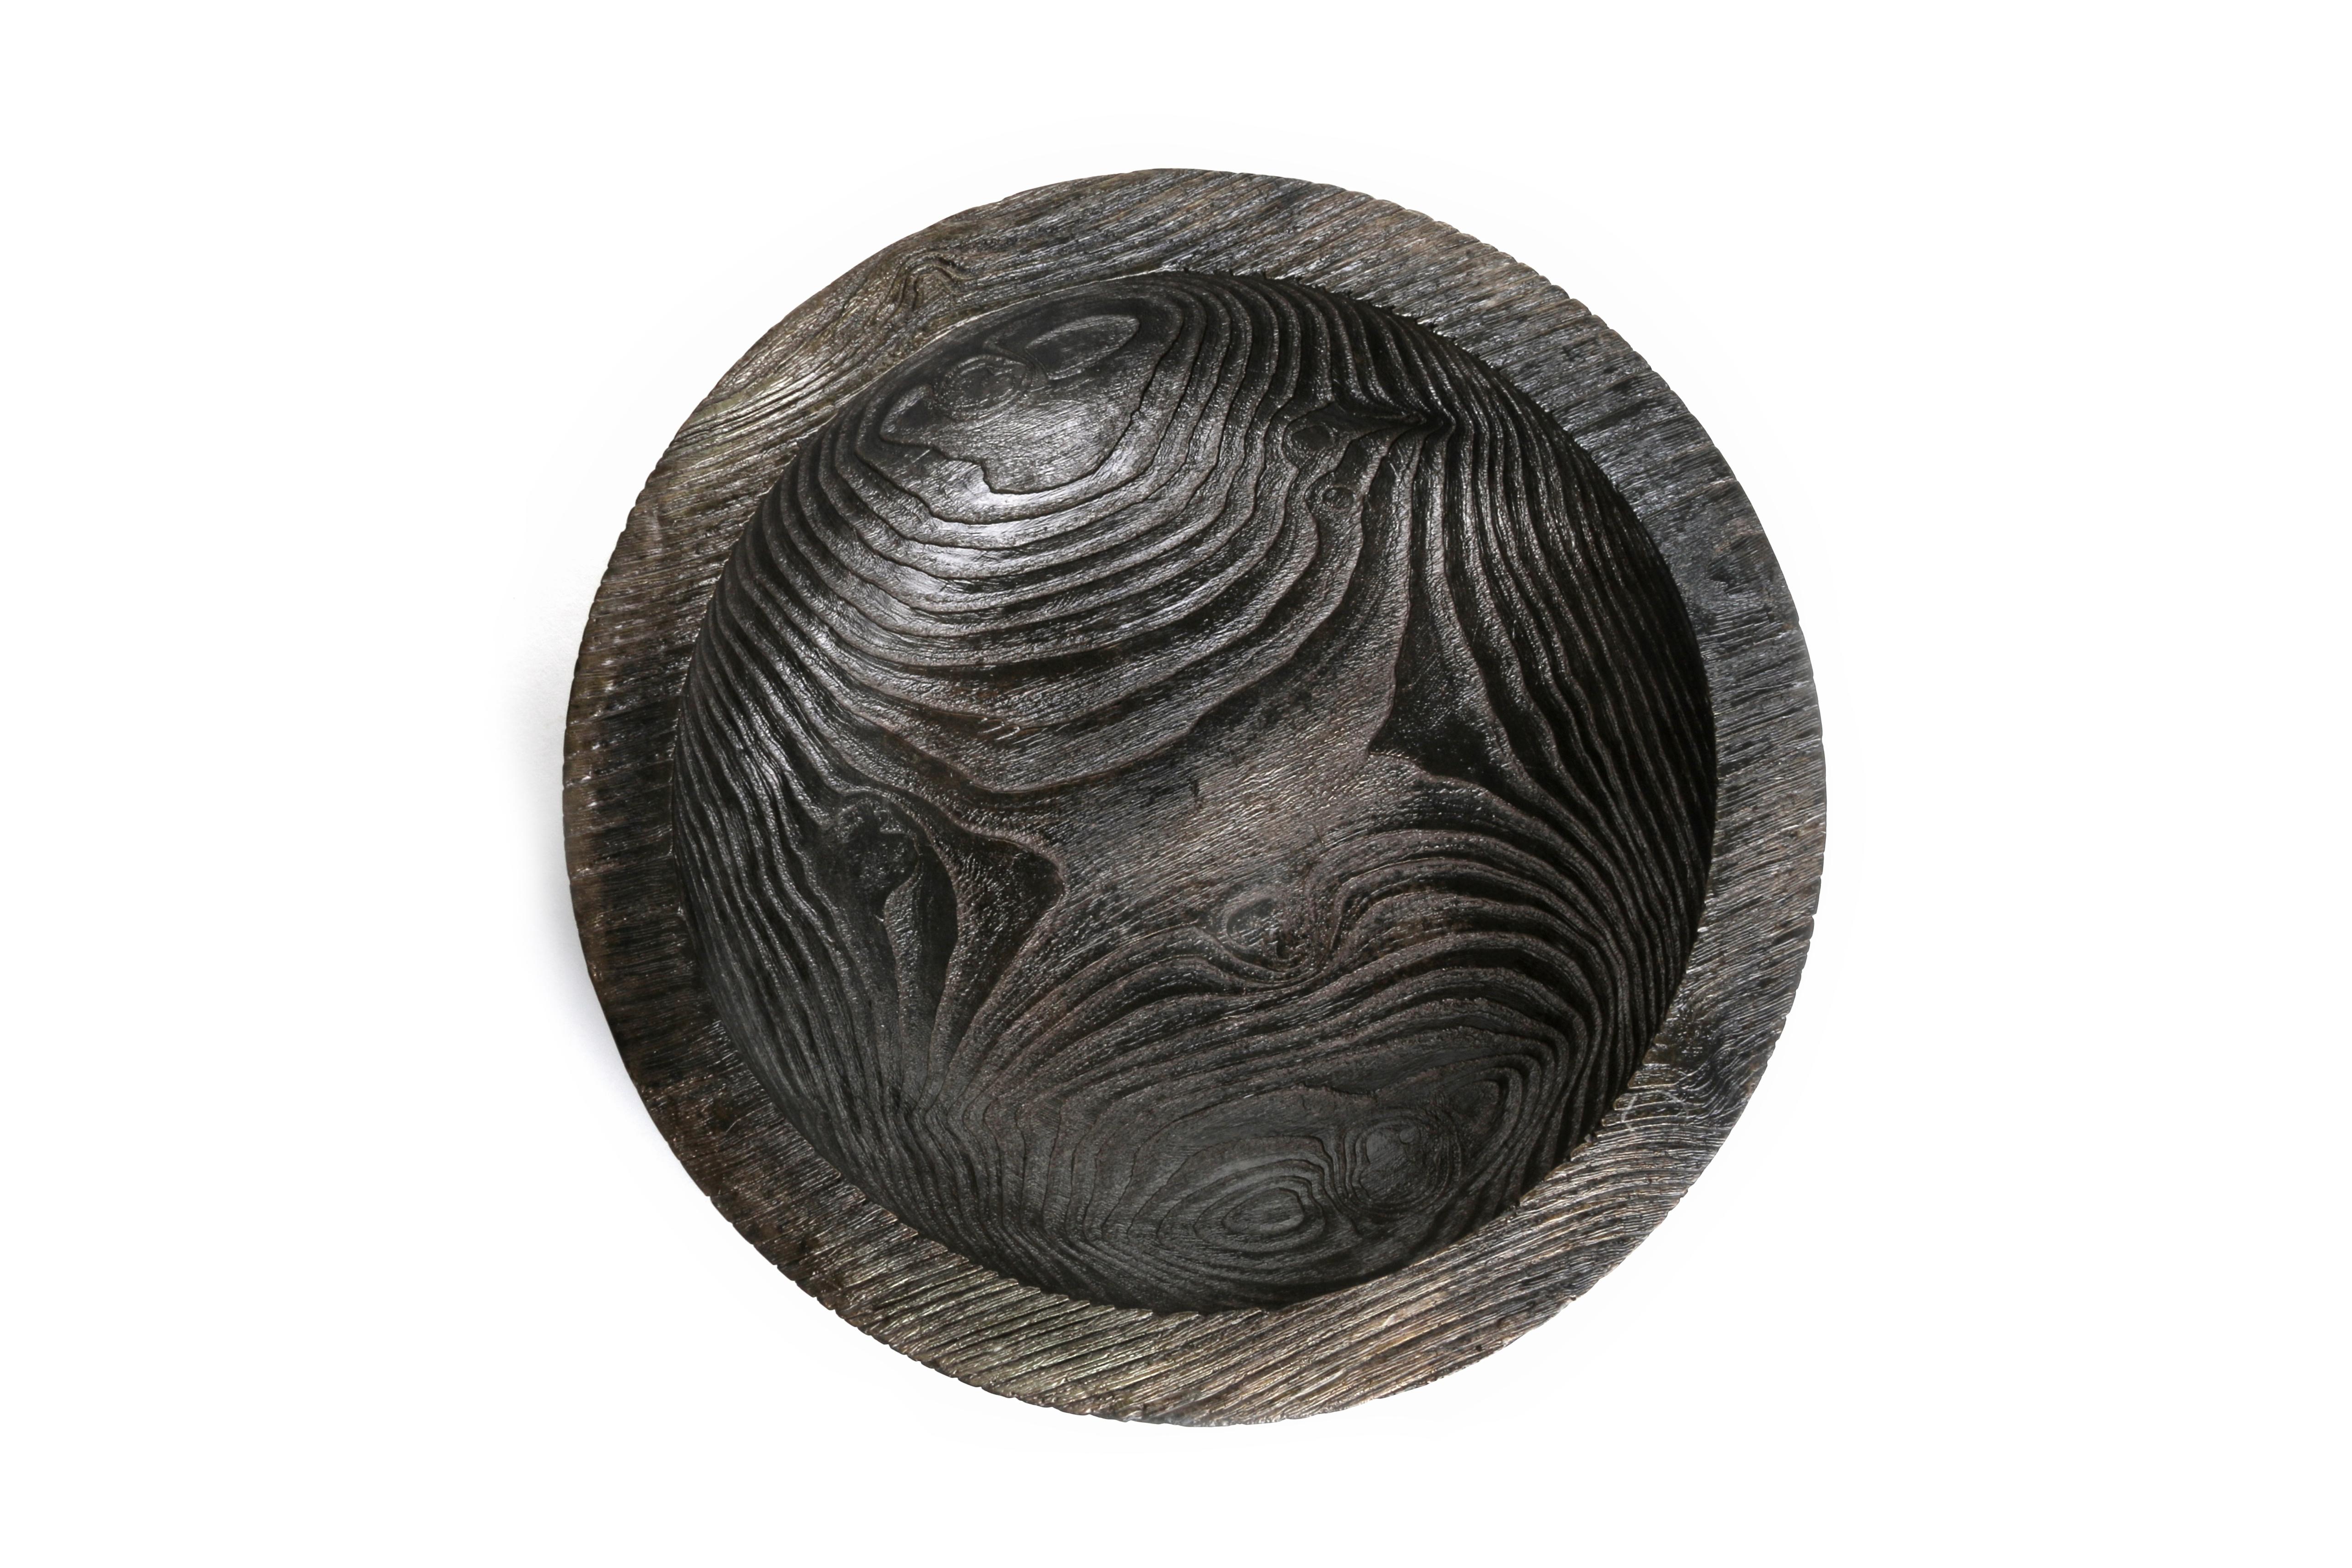 American Solid Bronze Everest Bowl / Vessel with Wooden Texture and Golden Bronze Patina For Sale